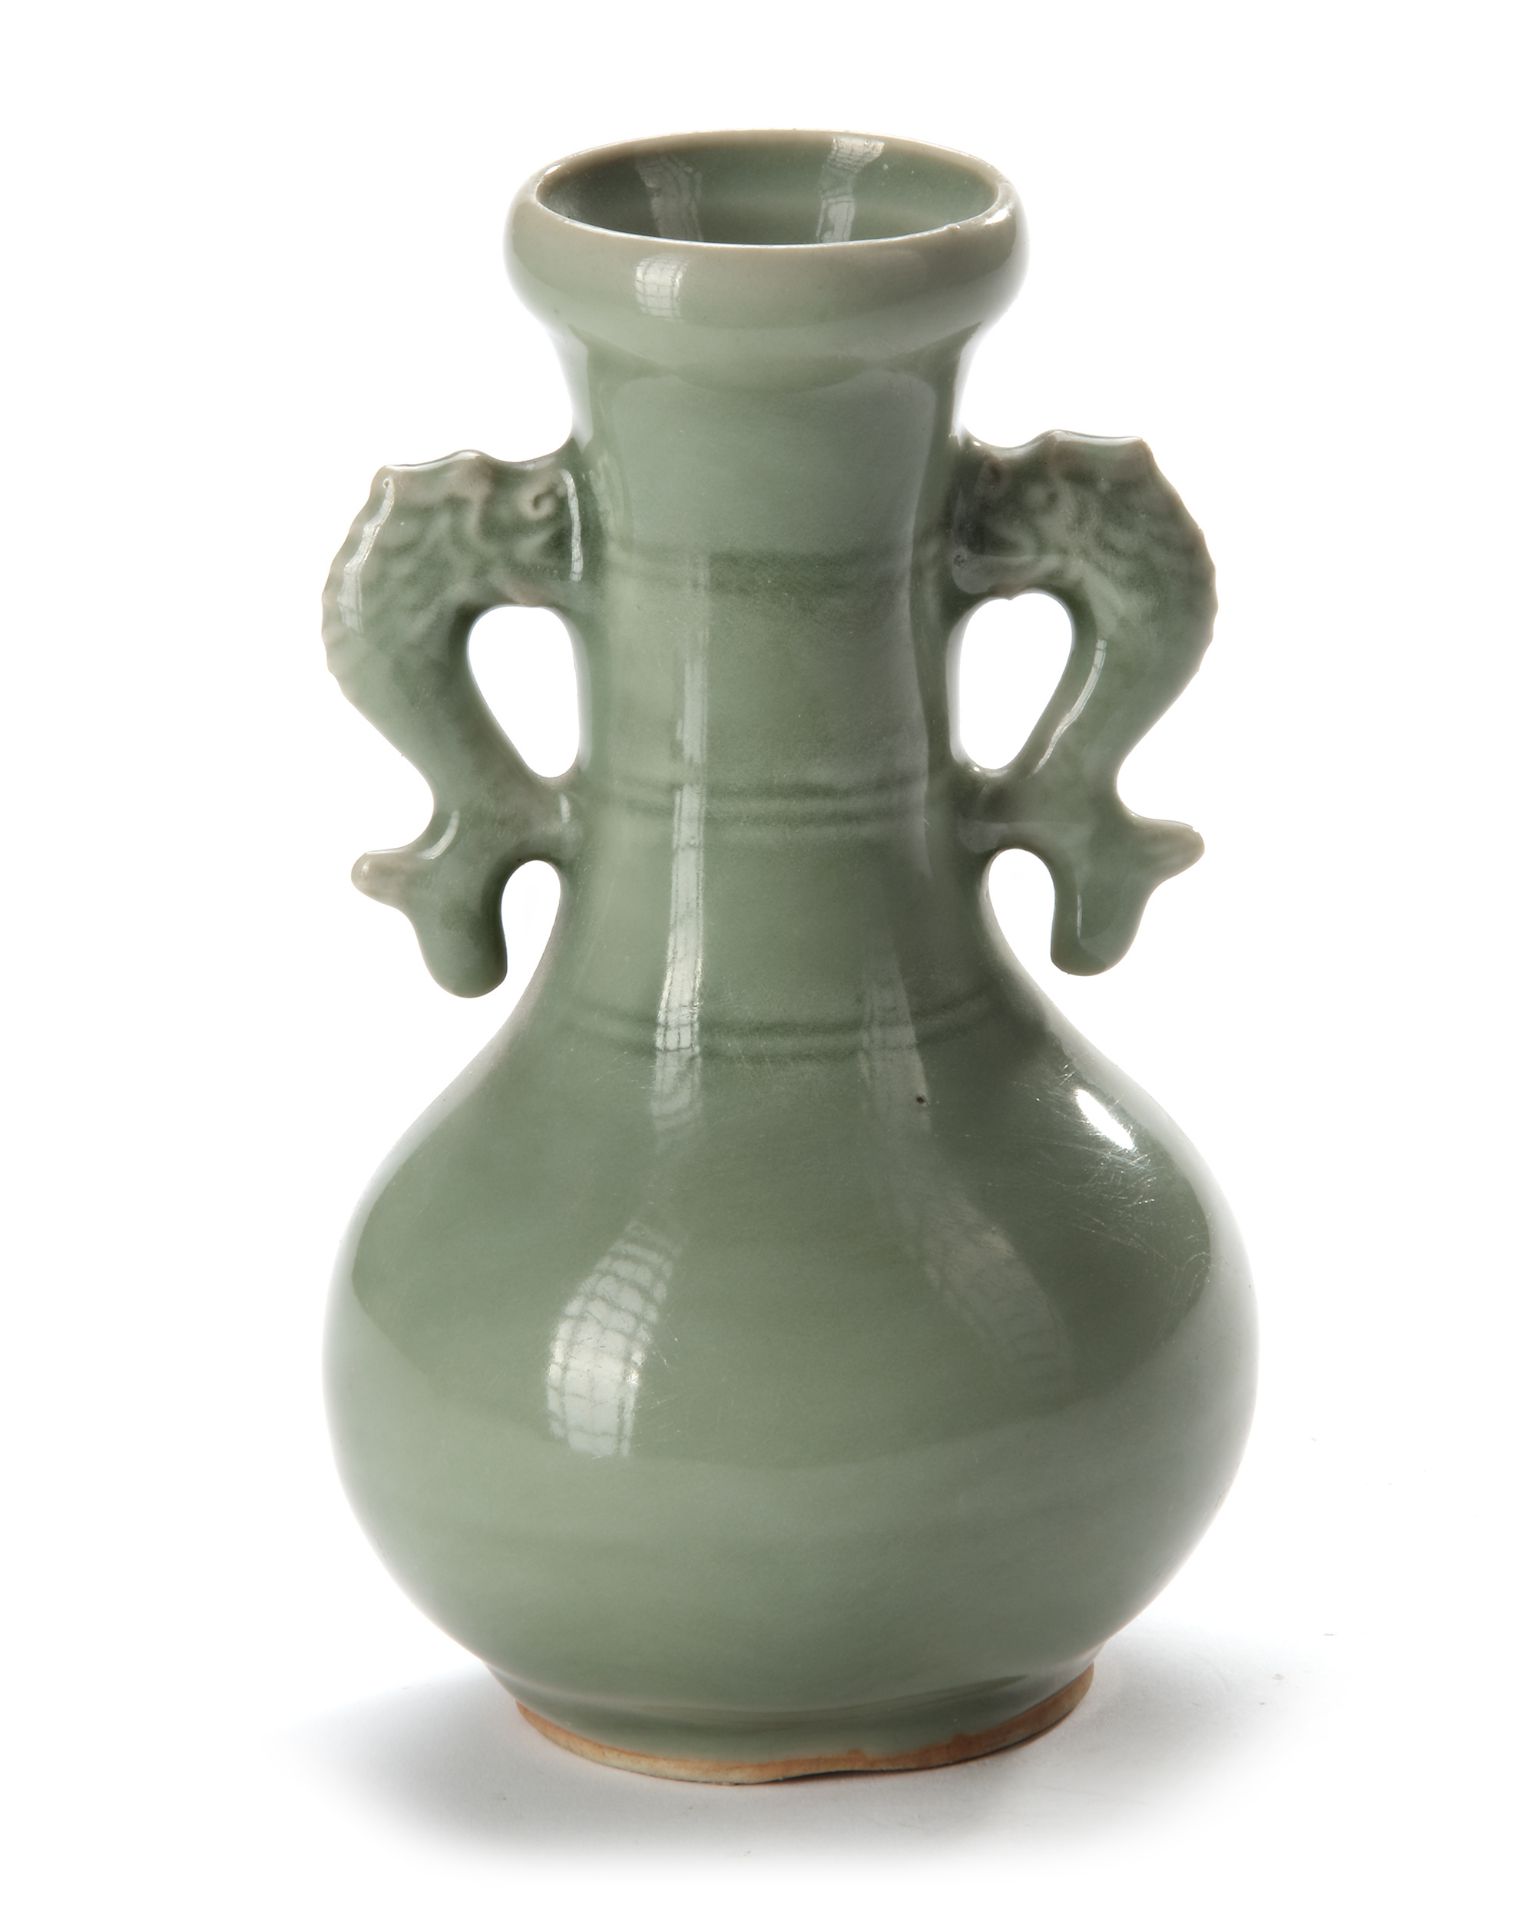 THREE CHINESE LONGQUAN CELADON VASES, SONG DYNASTY (960-1127 ) /YUAN DYNASTY (1271-1368) - Image 3 of 7